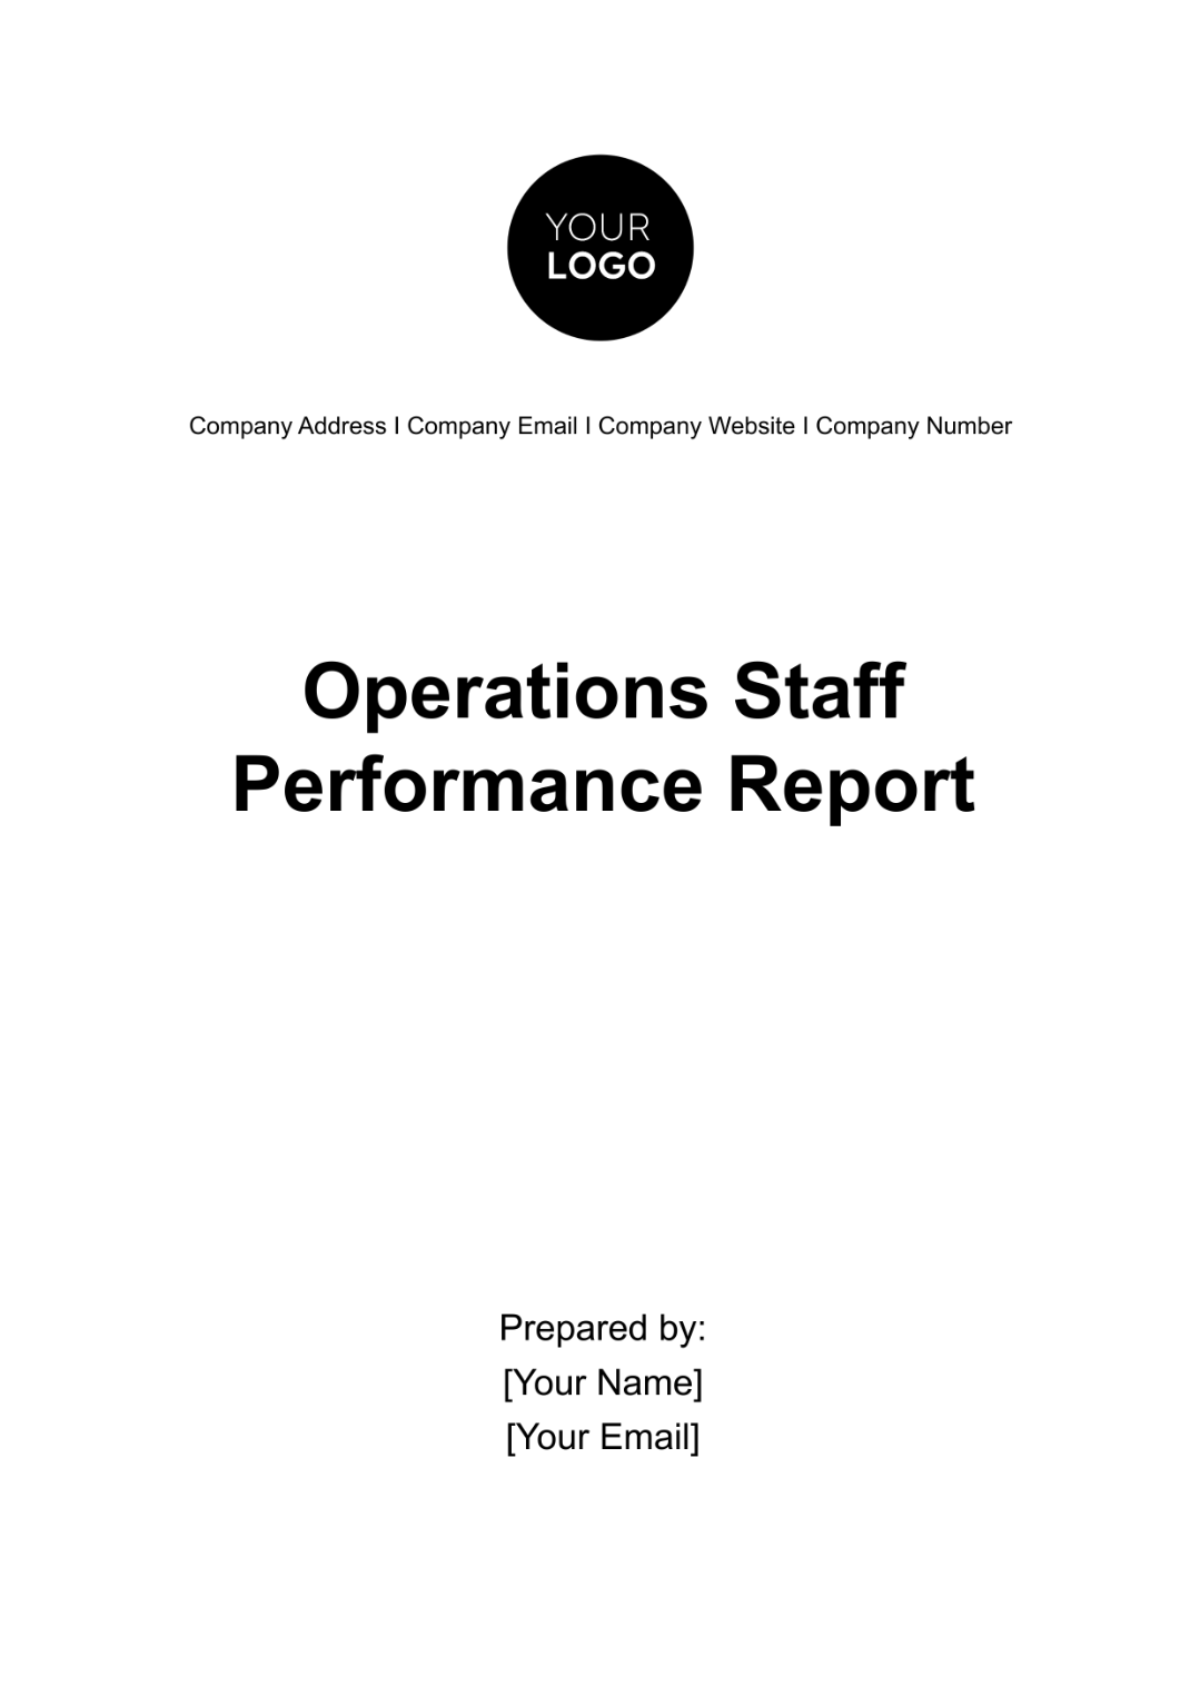 Operations Staff Performance Report Template